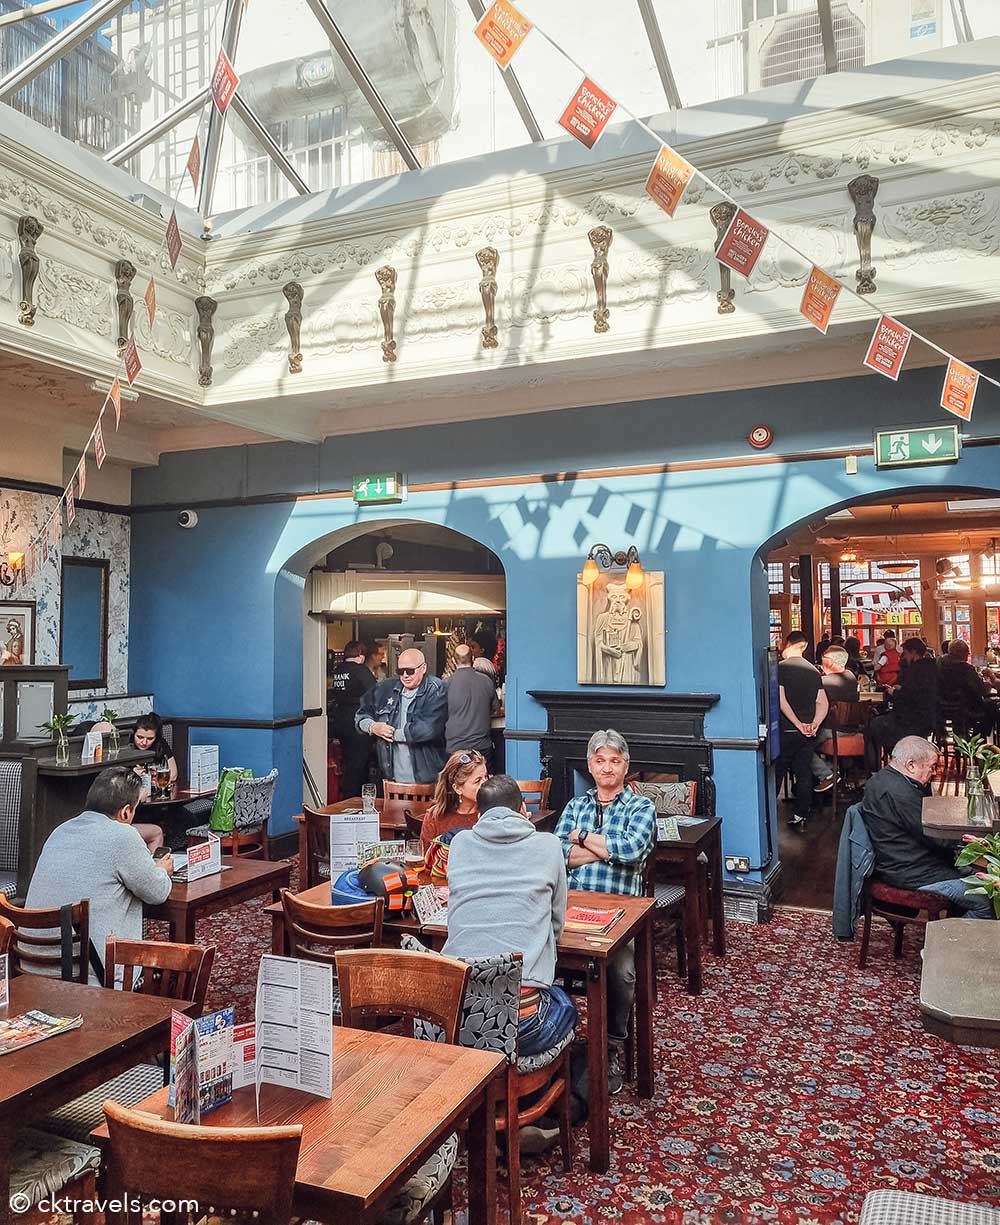 Rochester Castle (Wetherspoons Stoke Newington)